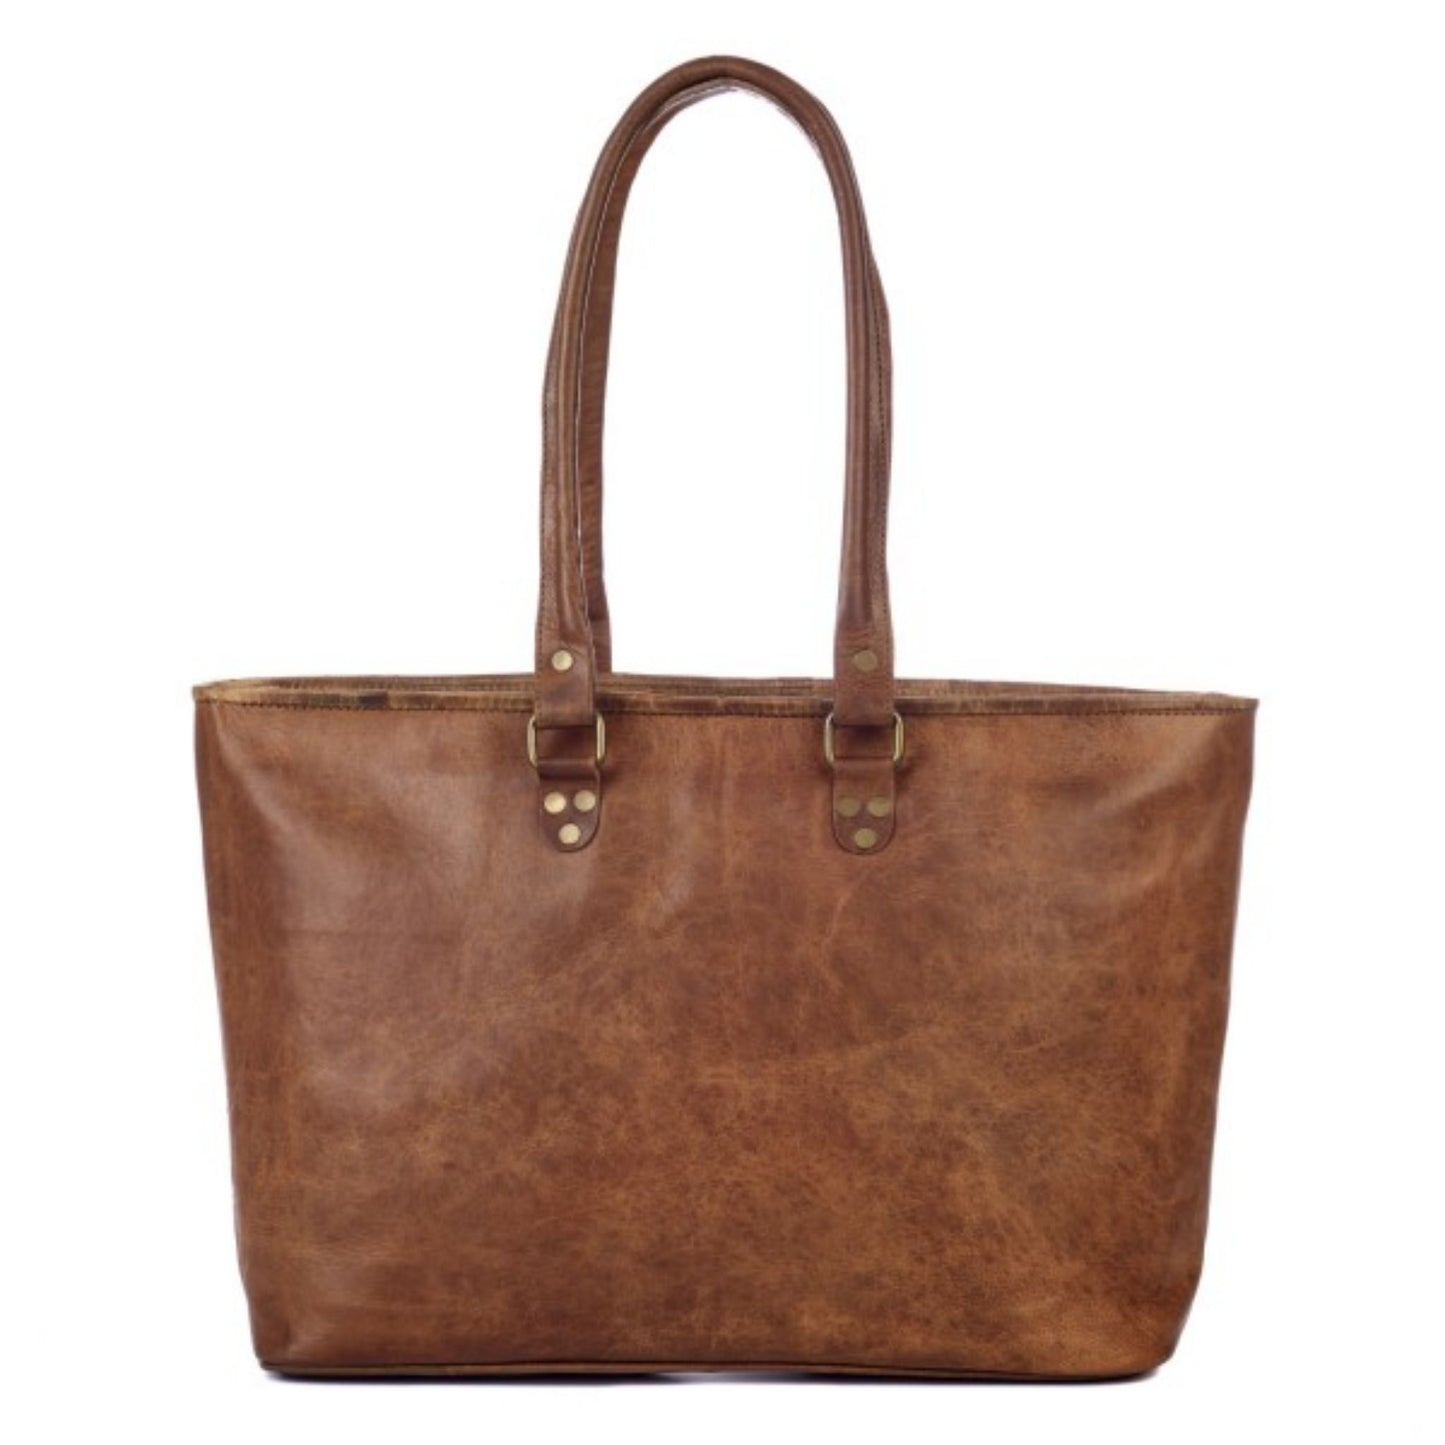 Large Leather Fair Trade Hand Bag